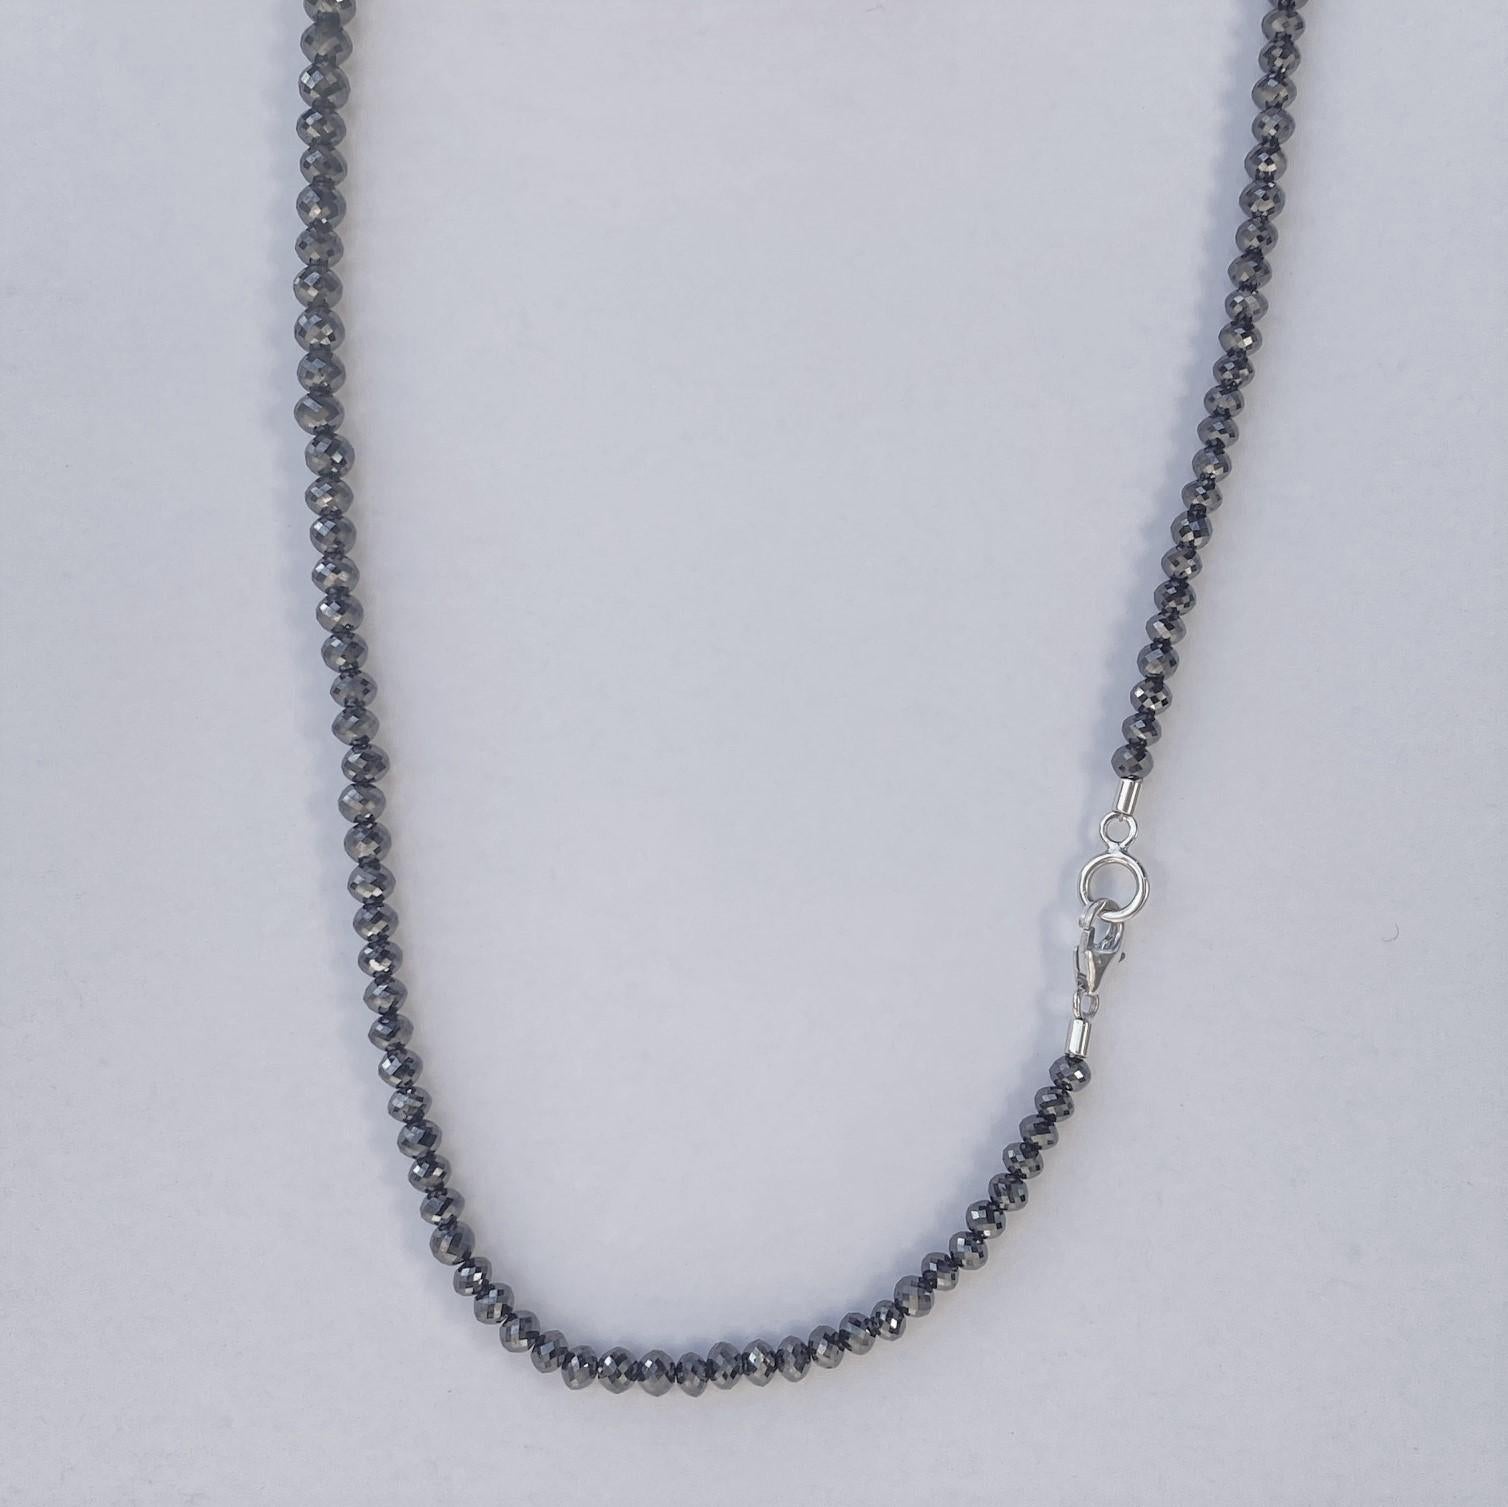 A strand of round faceted black diamond beads 51.11 total carat weight with 18k and 14k white gold clasp parts. This necklace was designed and made by llyn strong.